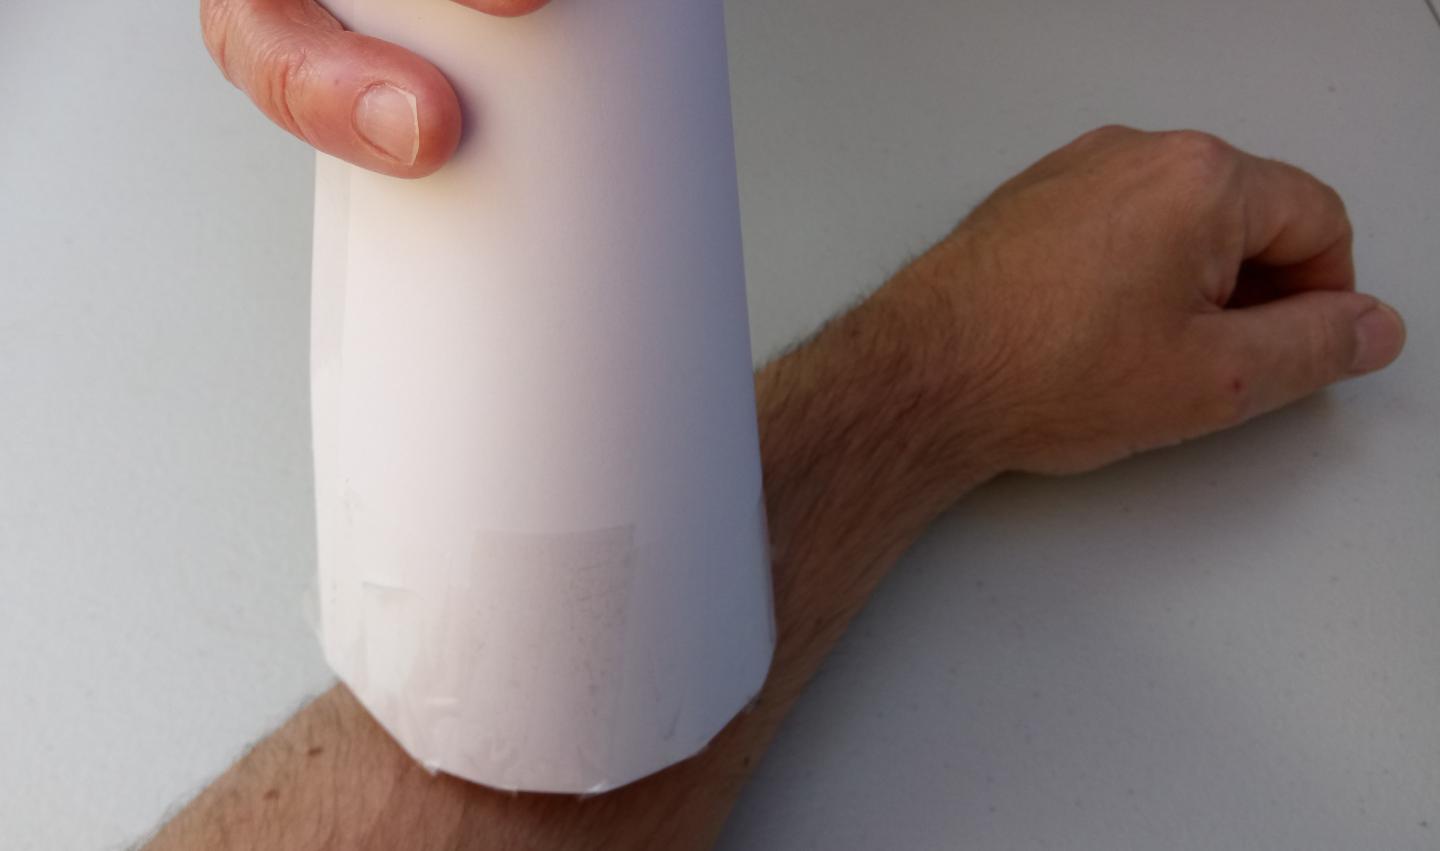 A paper megaphone being held against someone's arm.